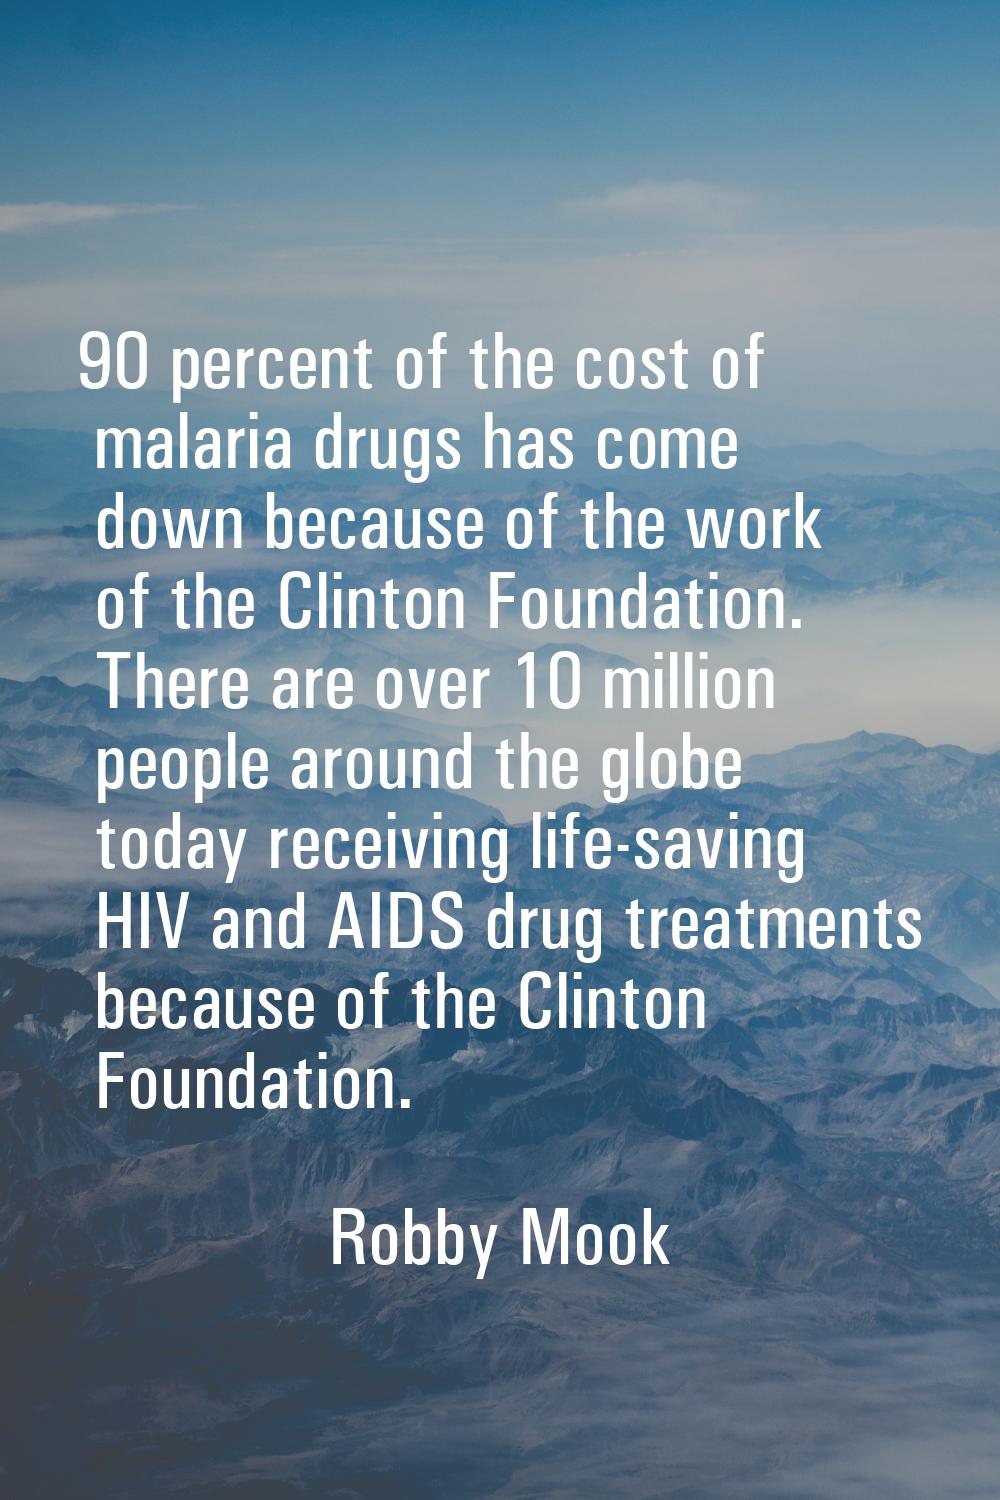 90 percent of the cost of malaria drugs has come down because of the work of the Clinton Foundation